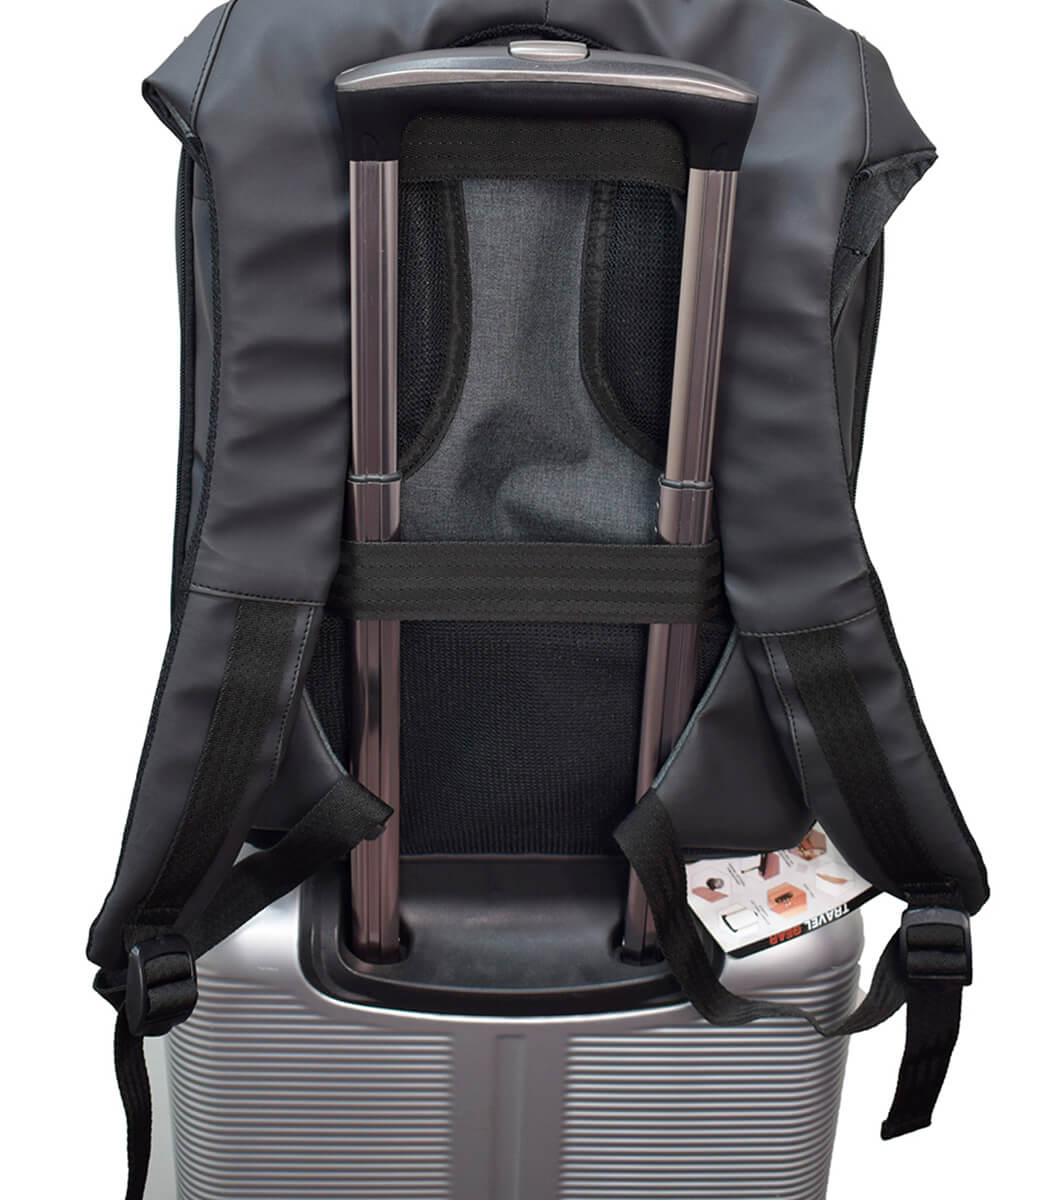 Swiss Military LBP73 – Laptop Backpack With USB Charging Port